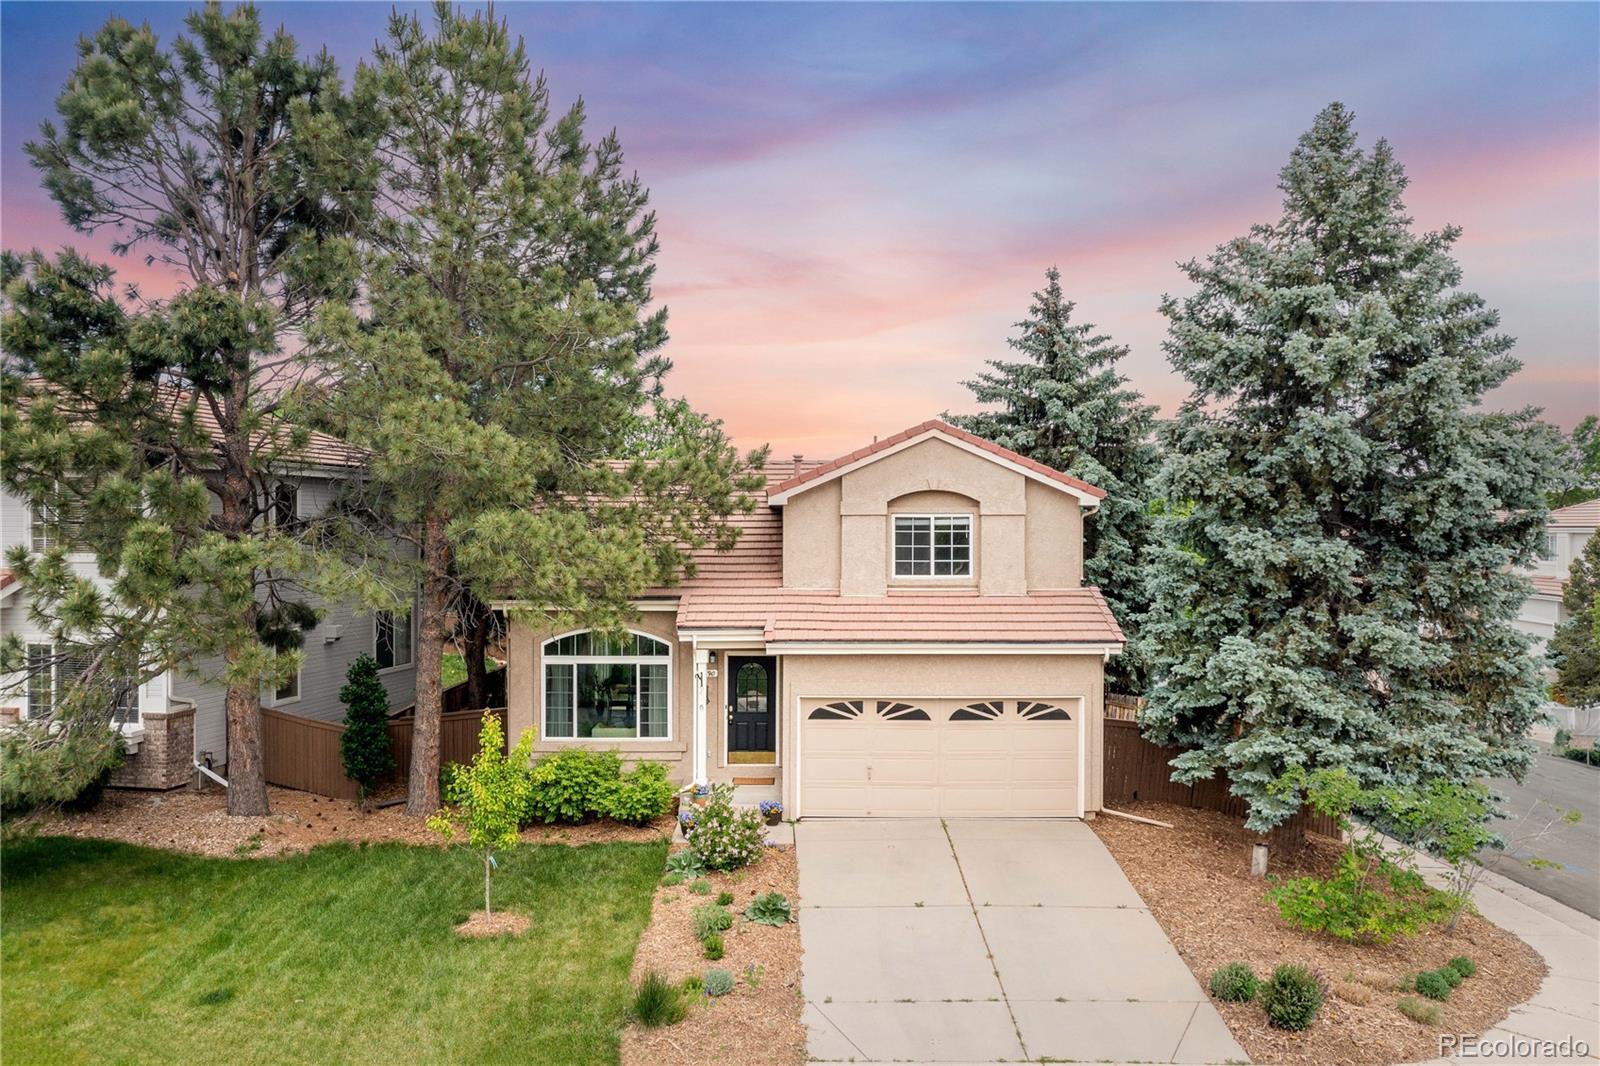 1590  Spring Water Way, highlands ranch MLS: 8662520 Beds: 4 Baths: 4 Price: $600,000